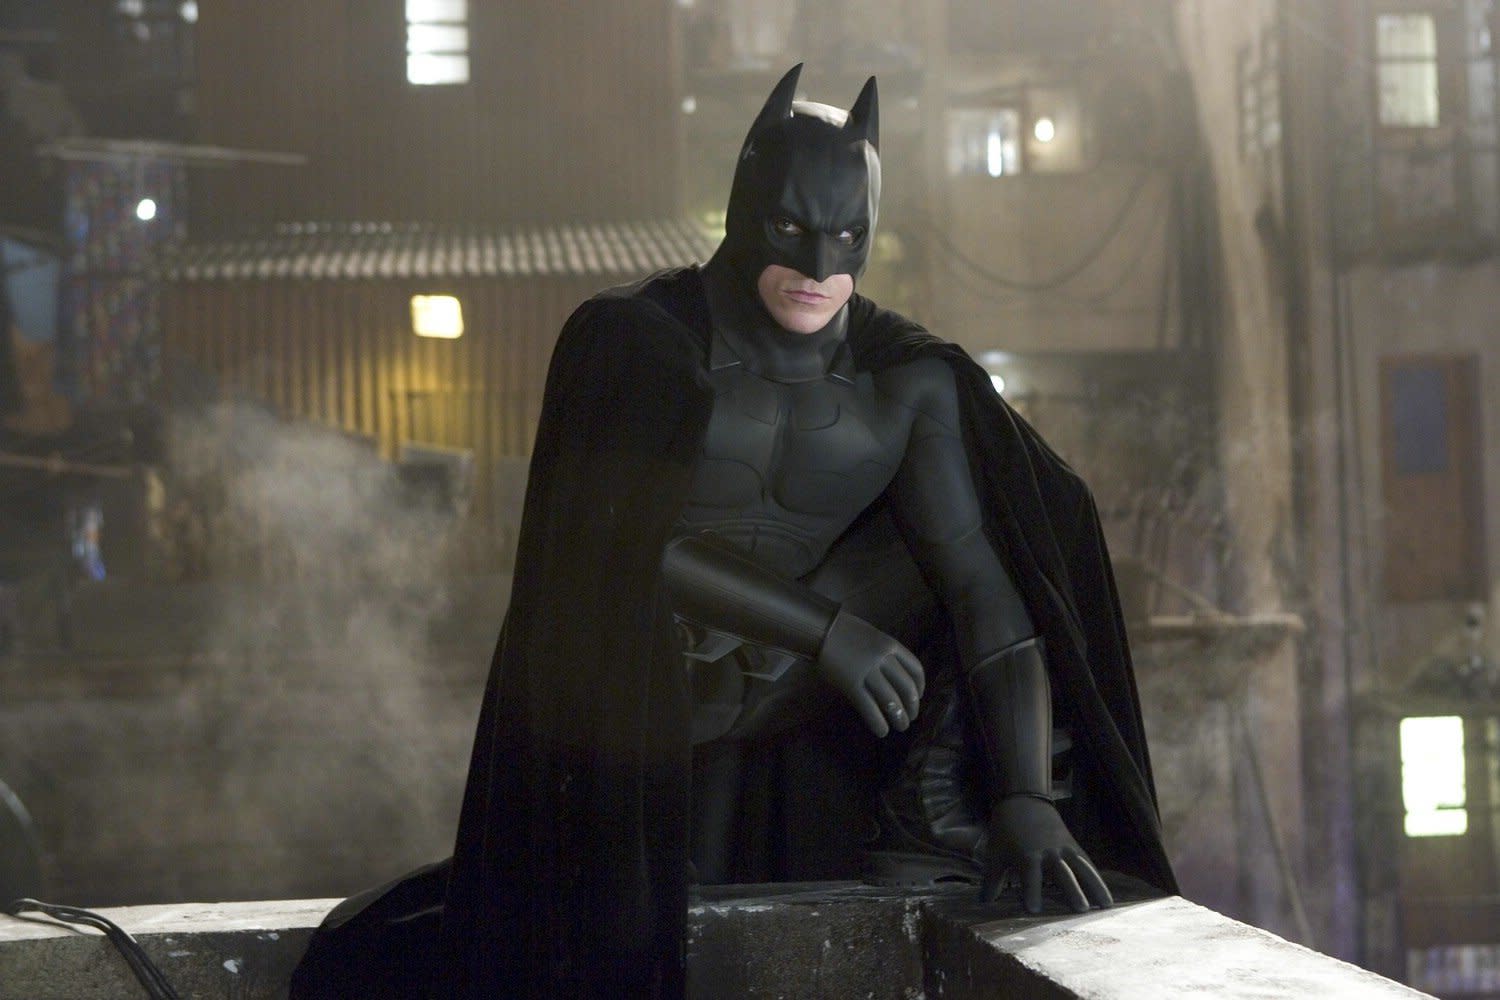 Batman Actors Ranked From Worst to Best: Ranking the Batmen